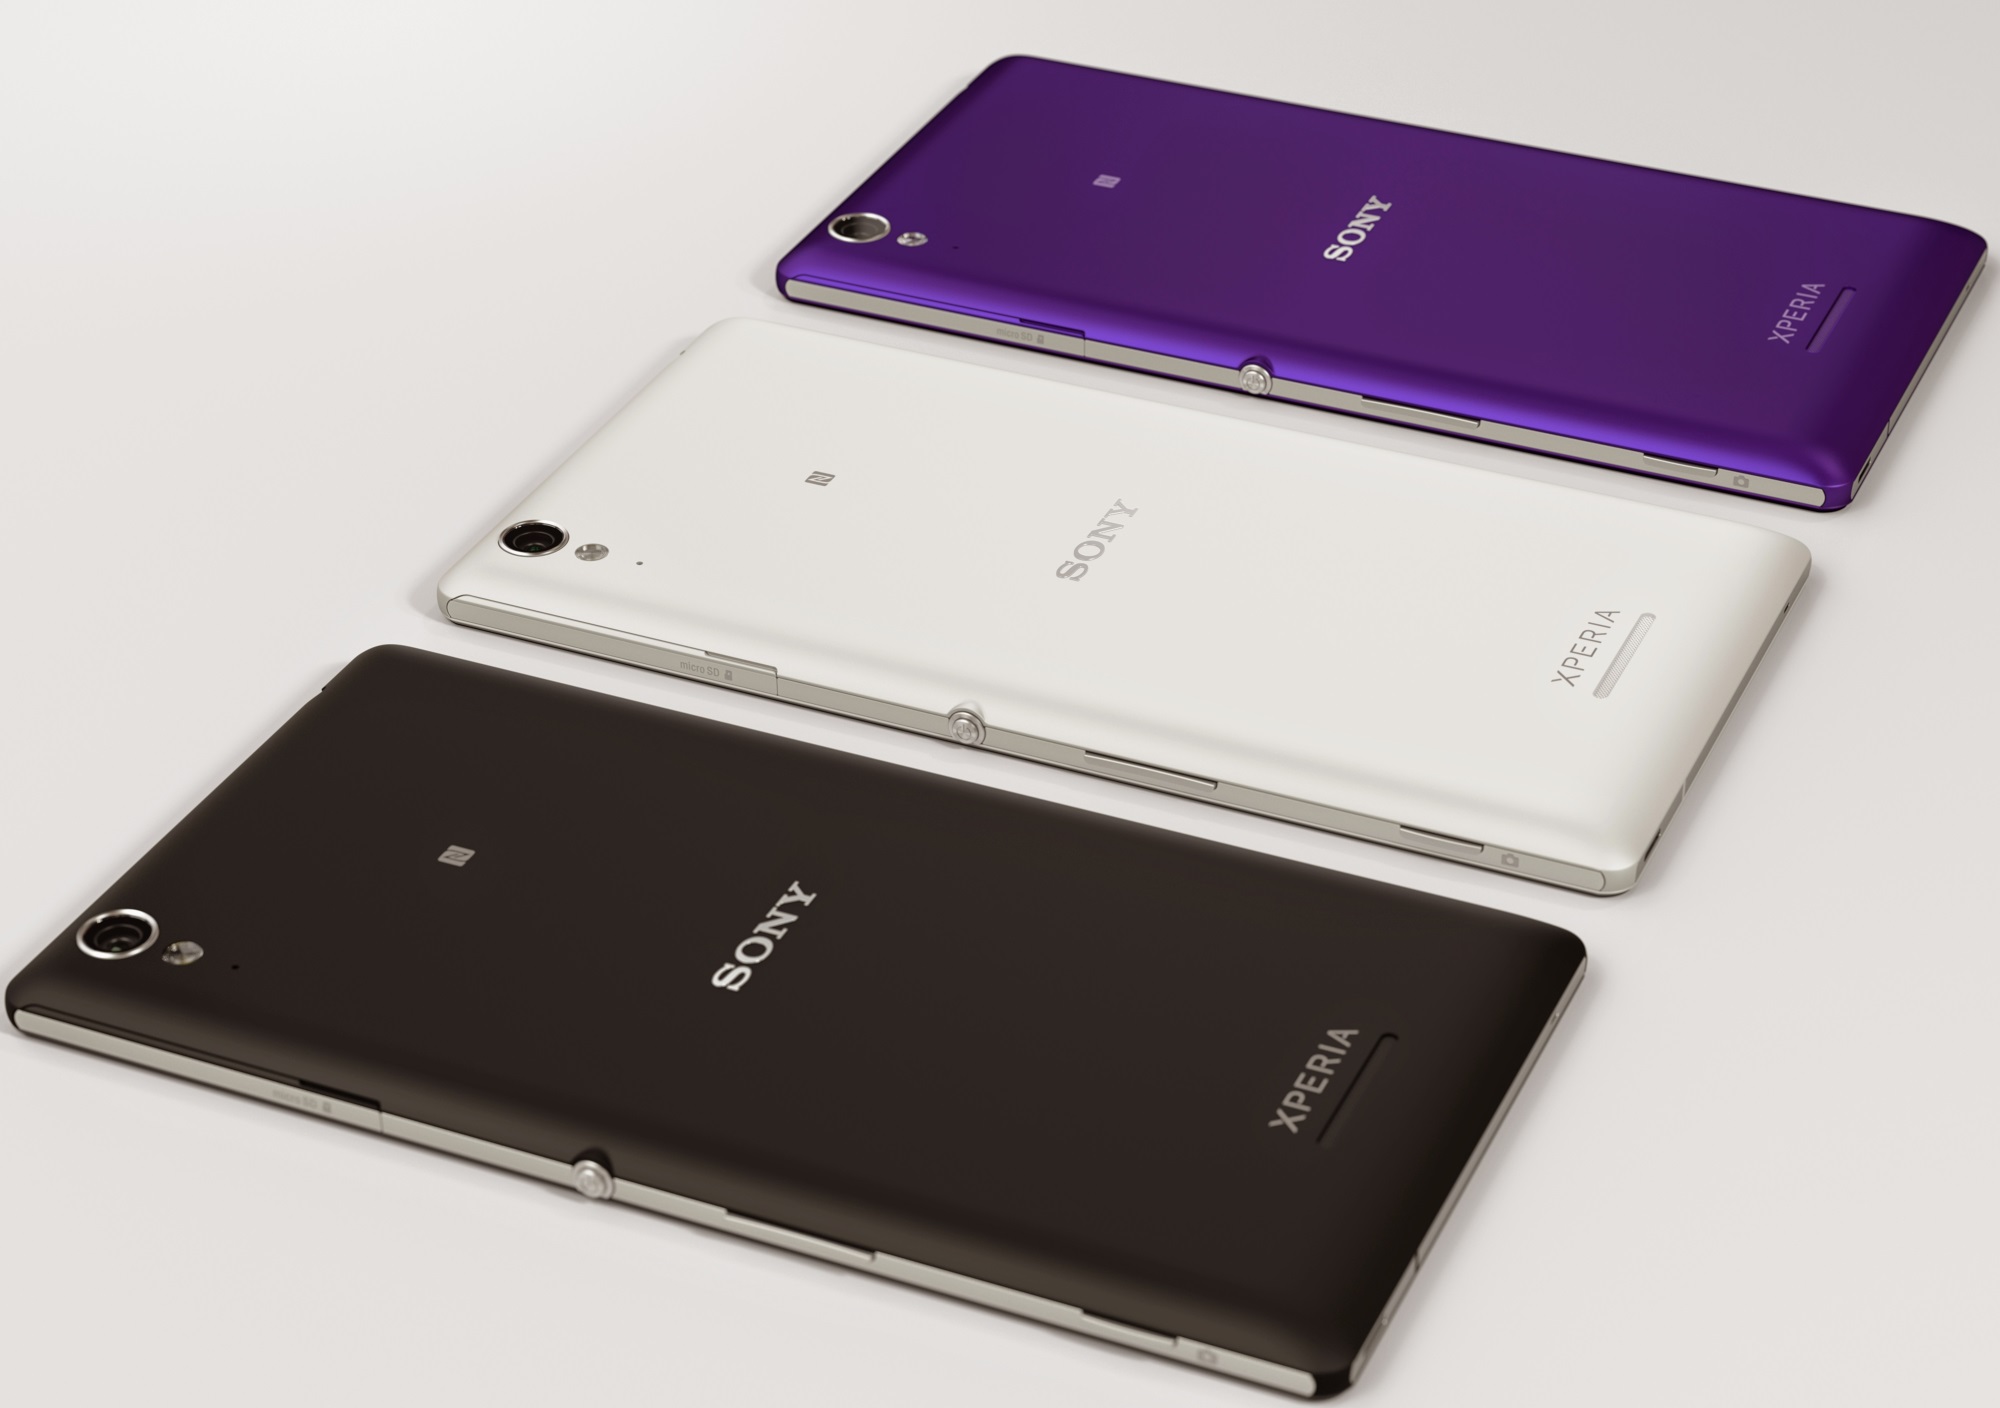 Sony xperia global. Sony Xperia t3. Sony Xperia t3 белый. Sony Xperia d5103. Xperia t3 d5103.